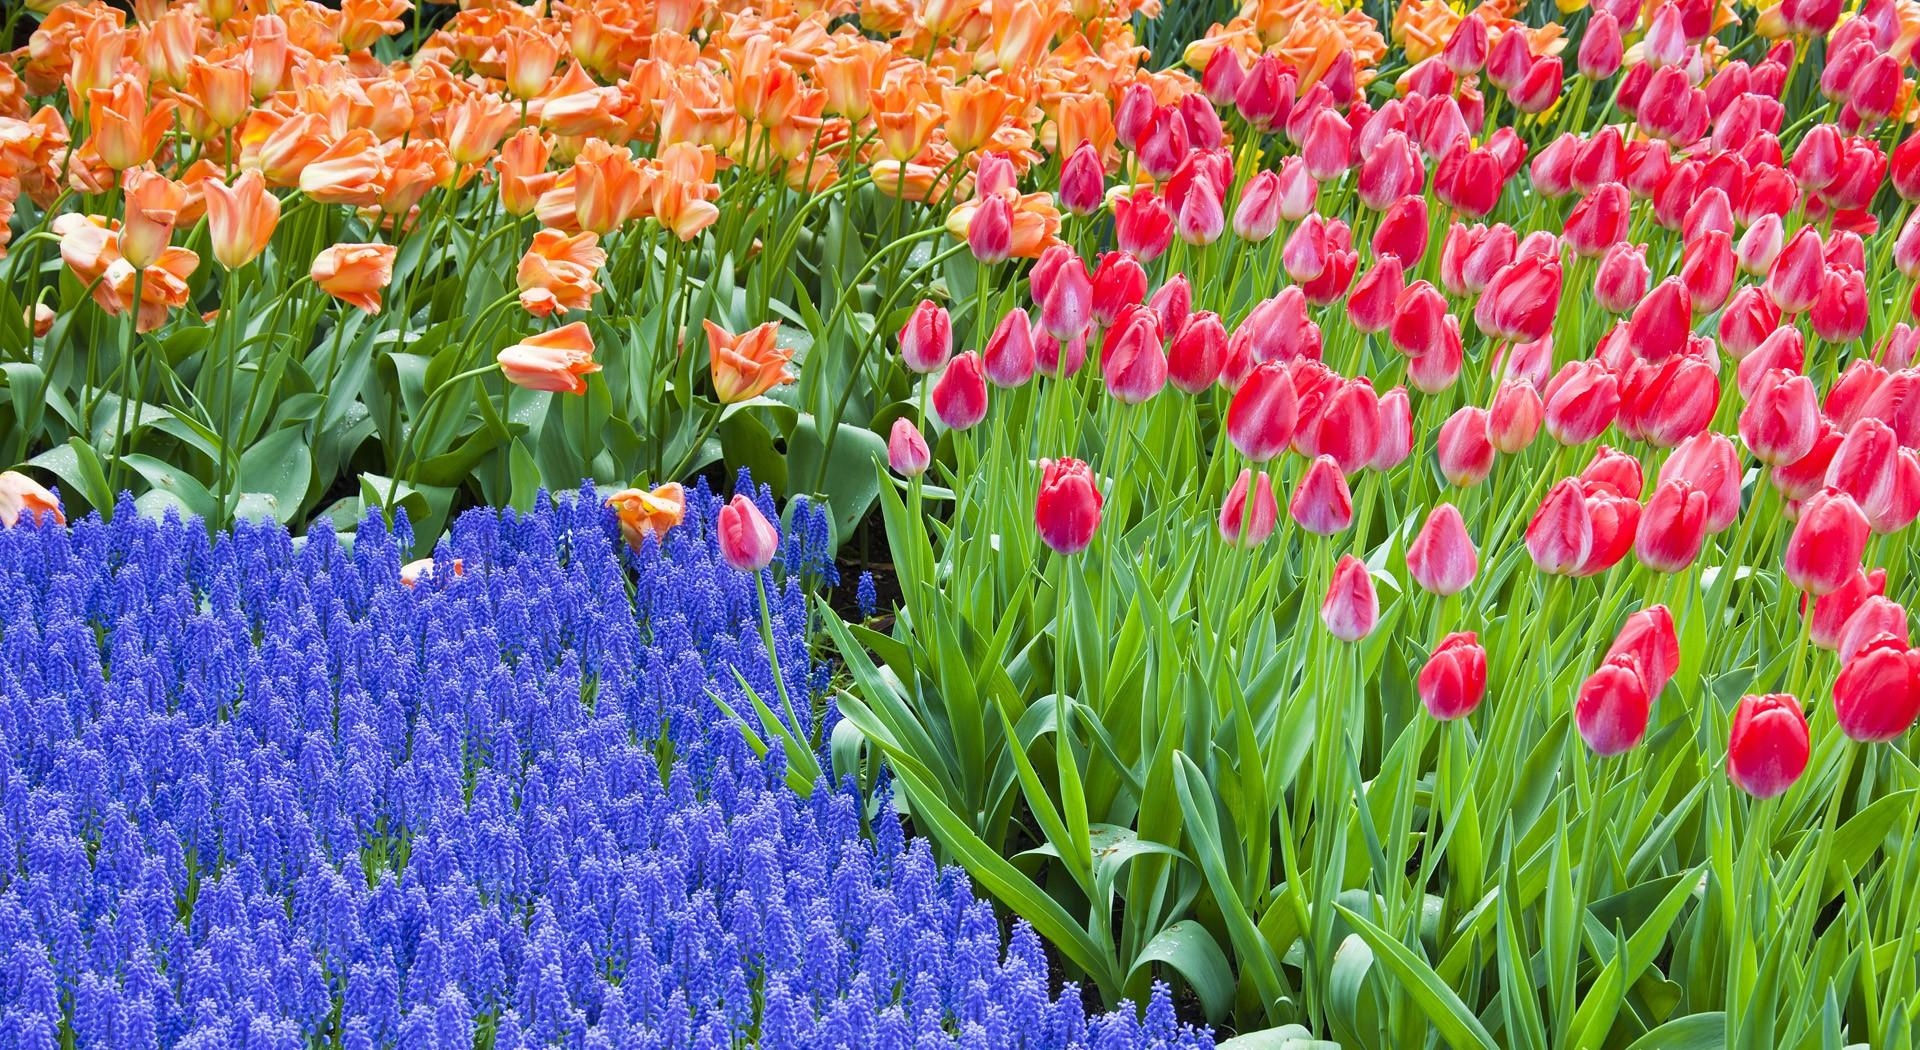 flower bed, greens, flowers, tulips, flowerbed, spring, hyacinths High Definition image